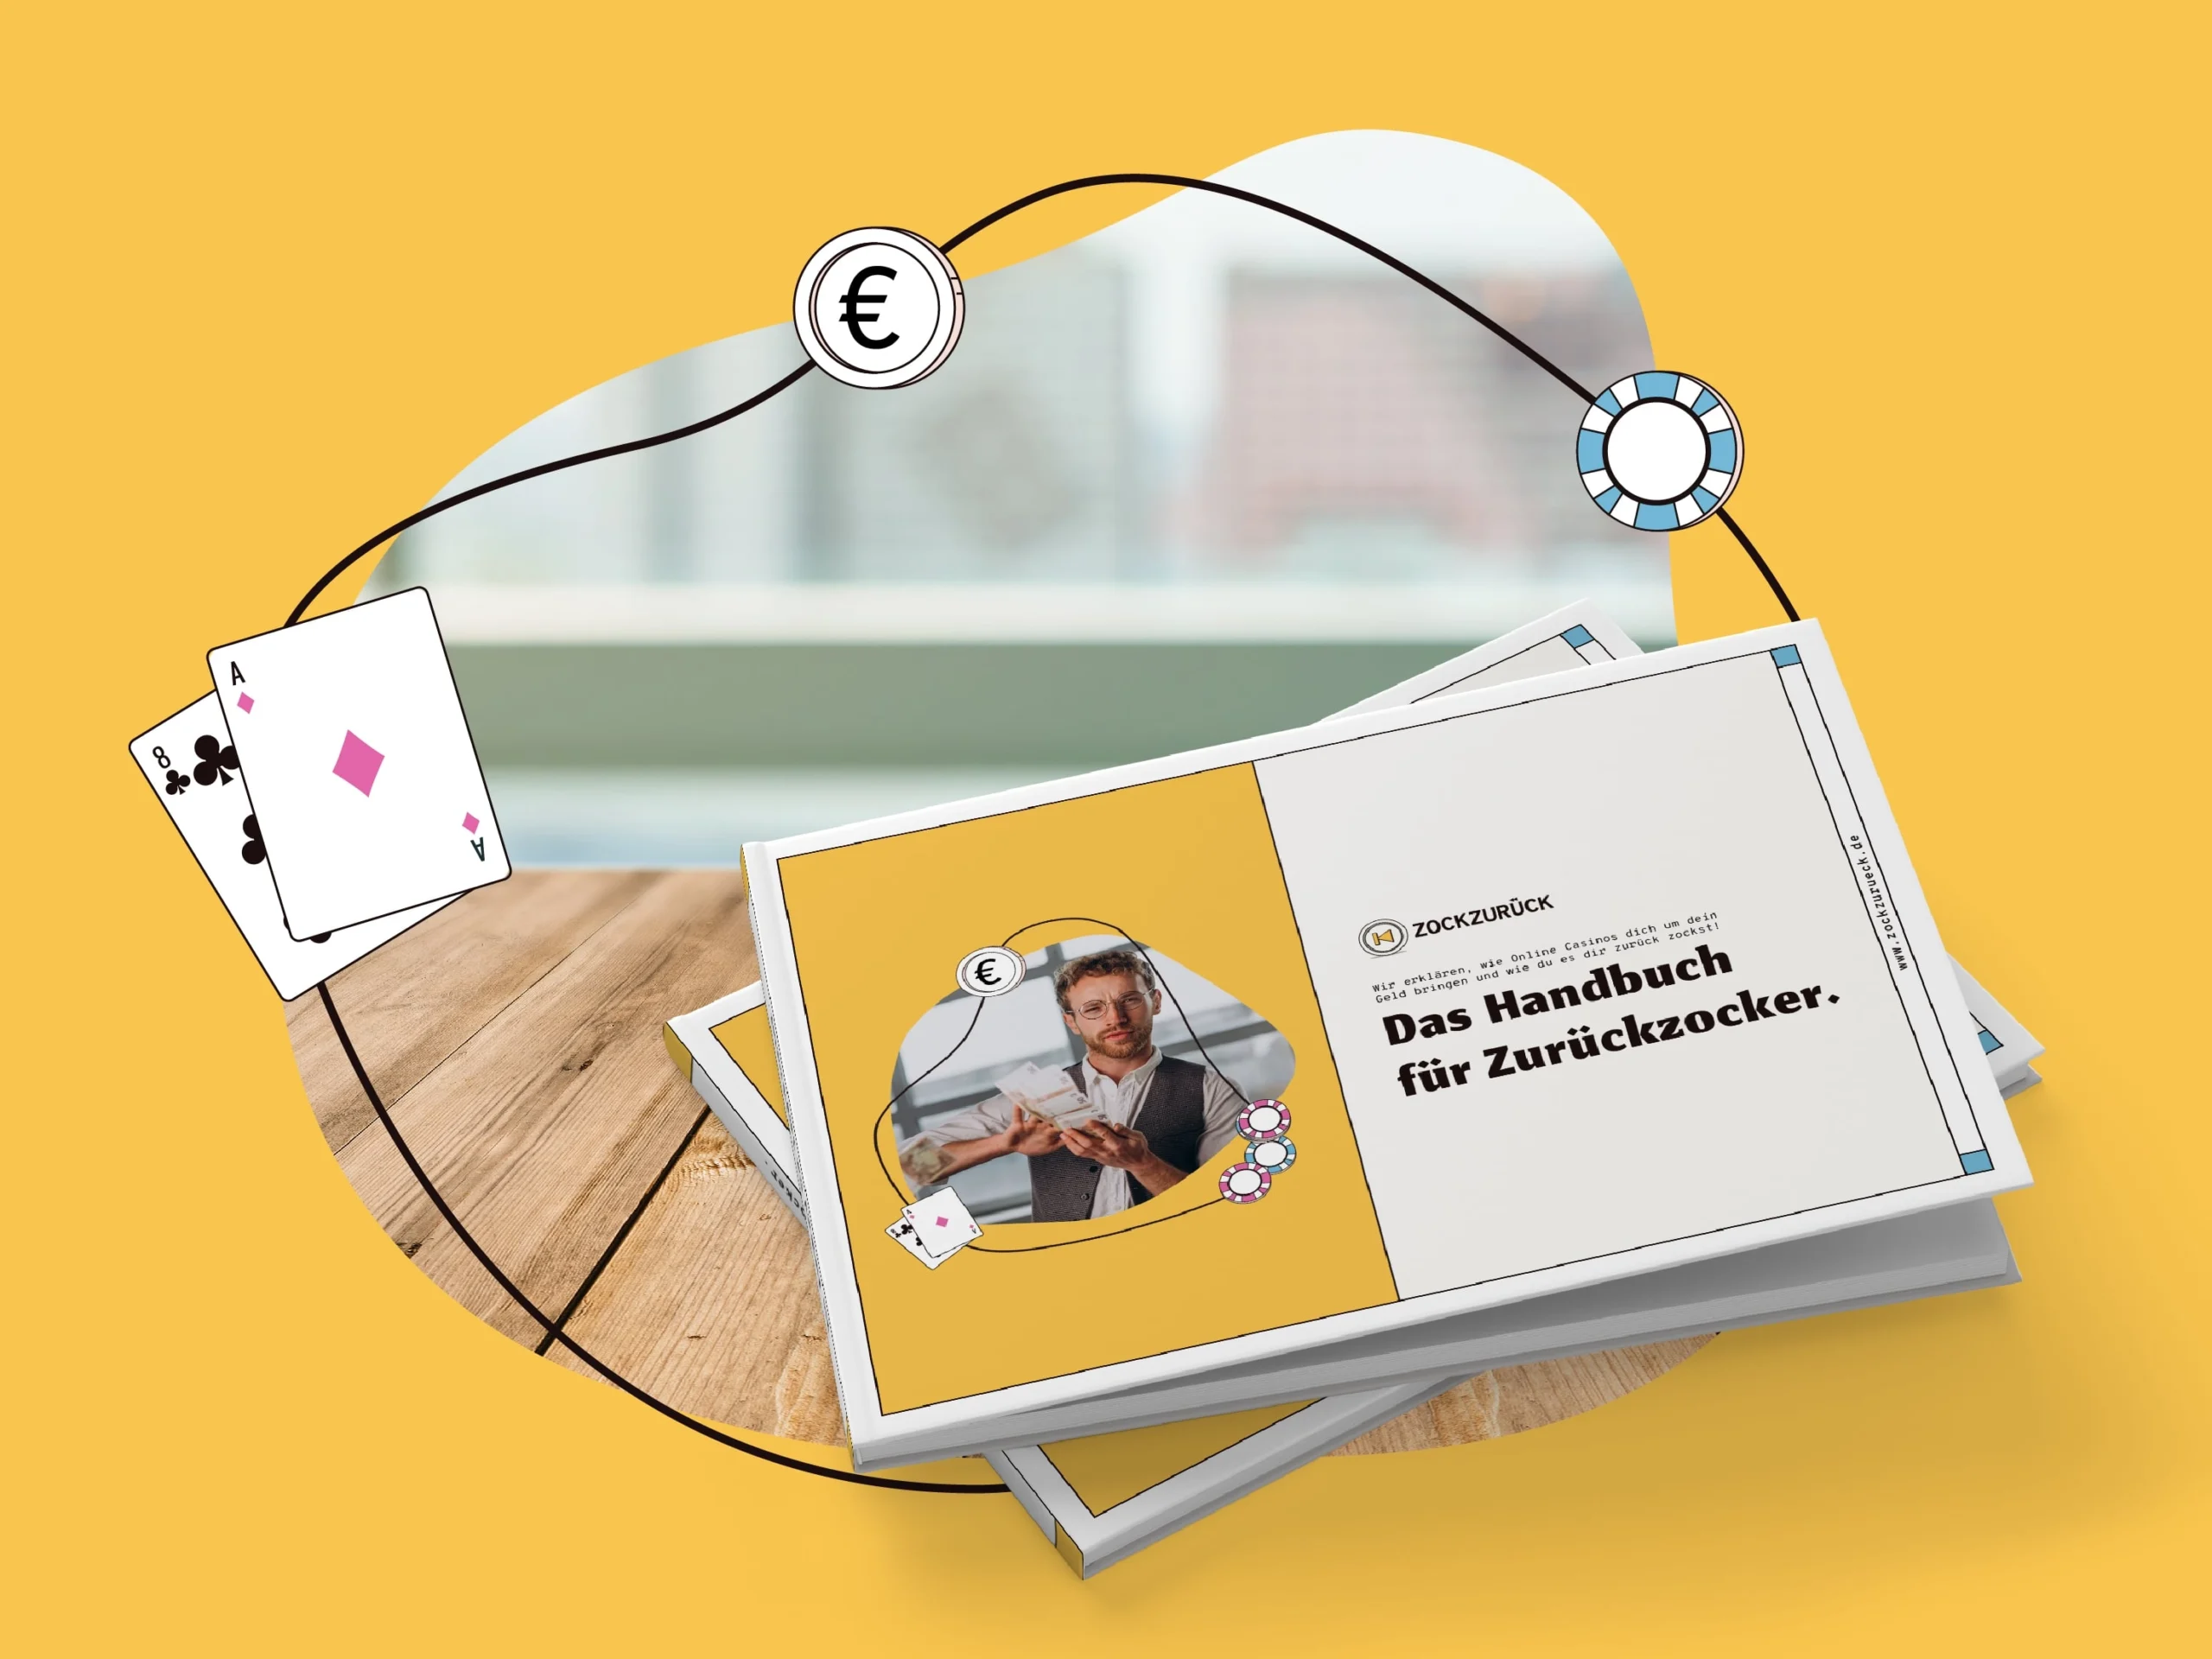 Email marketing and eBook materials, created by Komsulting Marketing Advice on branding from the lawyer service Zockzurück from Berlin